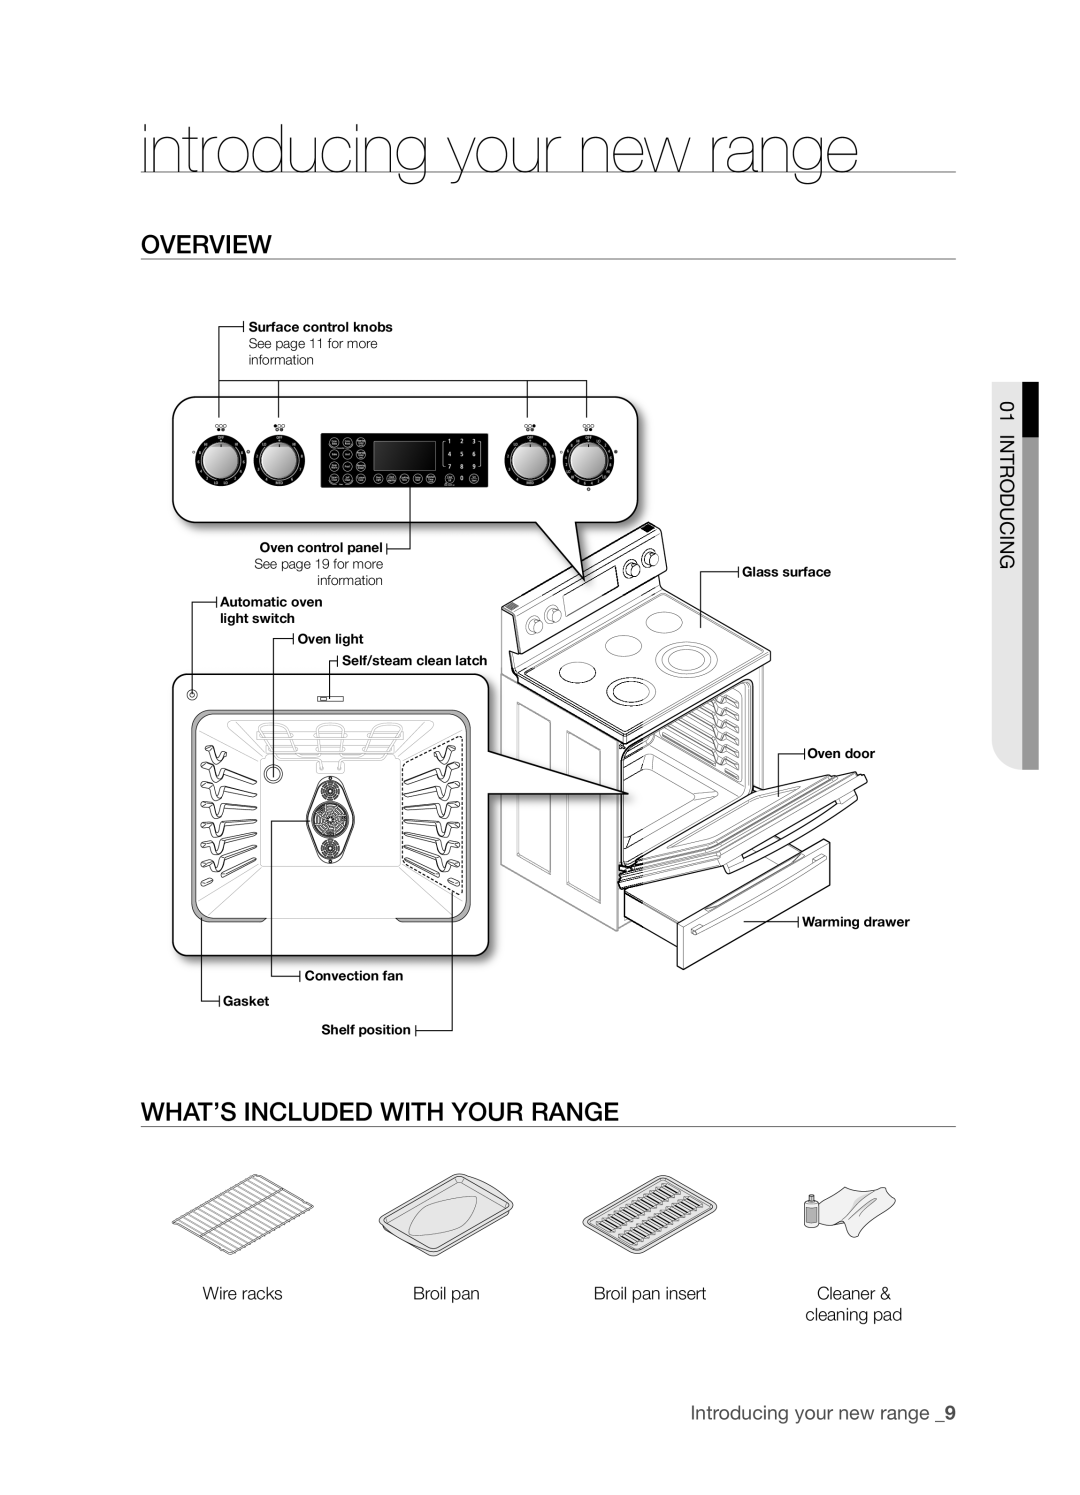 Samsung FTQ386LWX user manual introducing your new range, Overview, What’S Included With Your Range, Introducing 